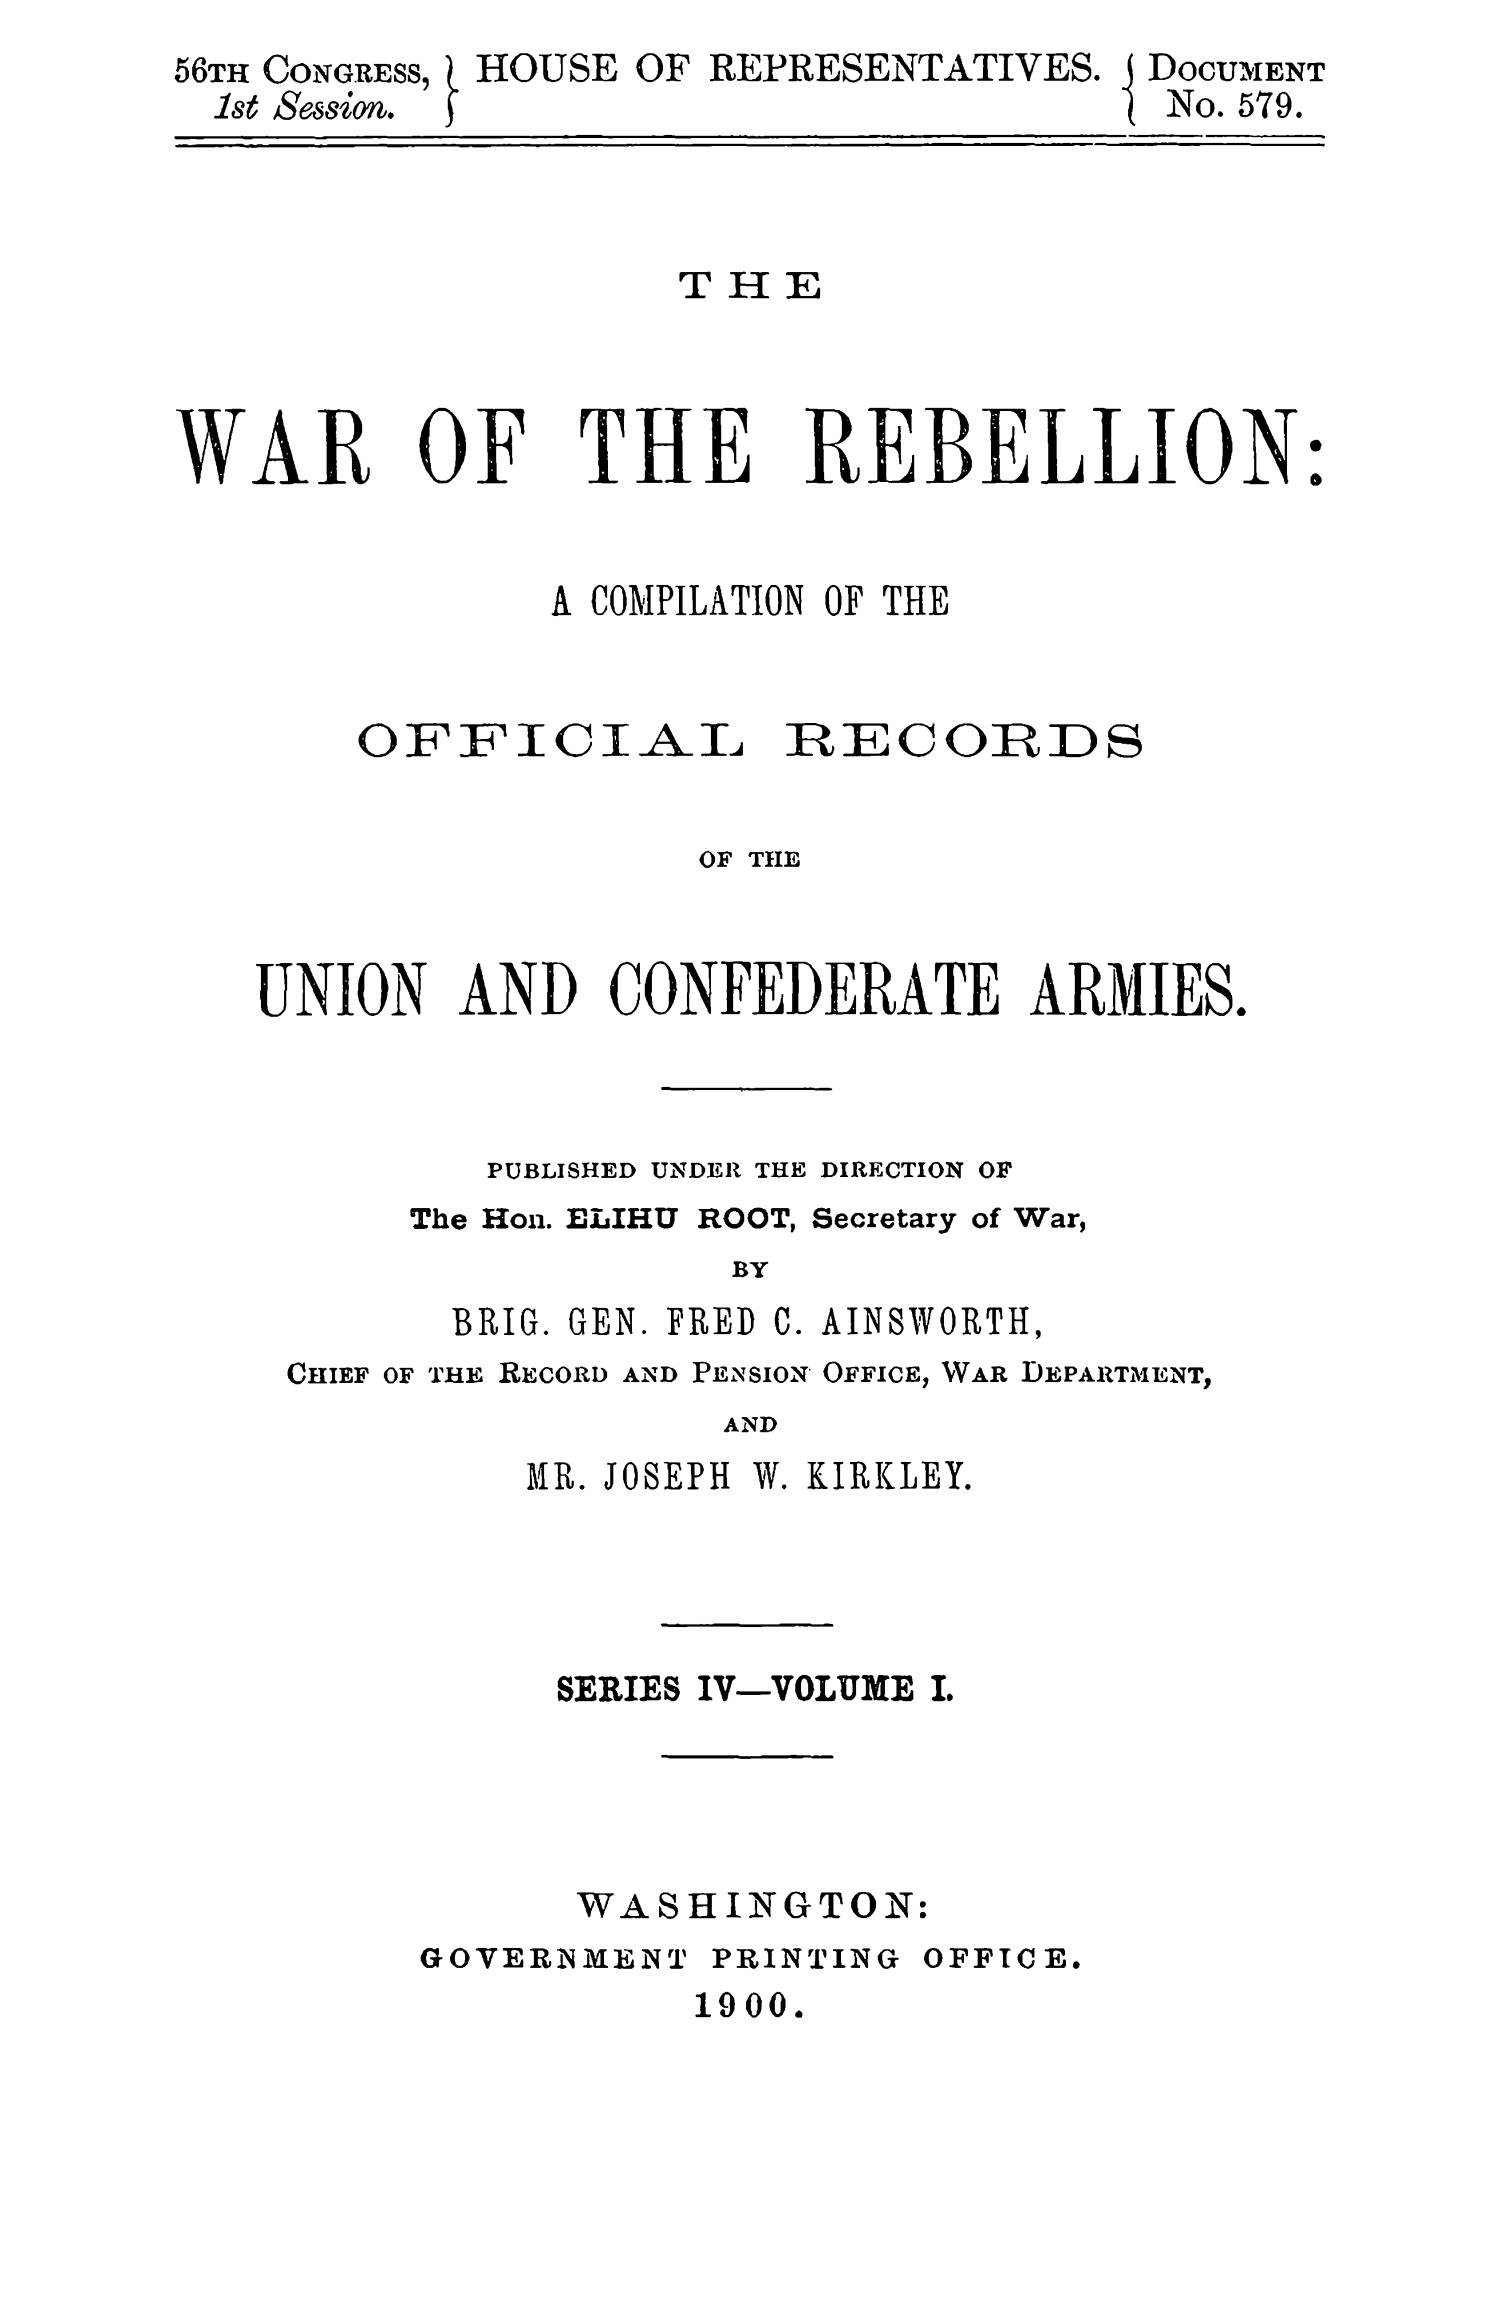 The War of the Rebellion: A Compilation of the Official Records of the Union And Confederate Armies. Series 4, Volume 1.
                                                
                                                    Title Page
                                                